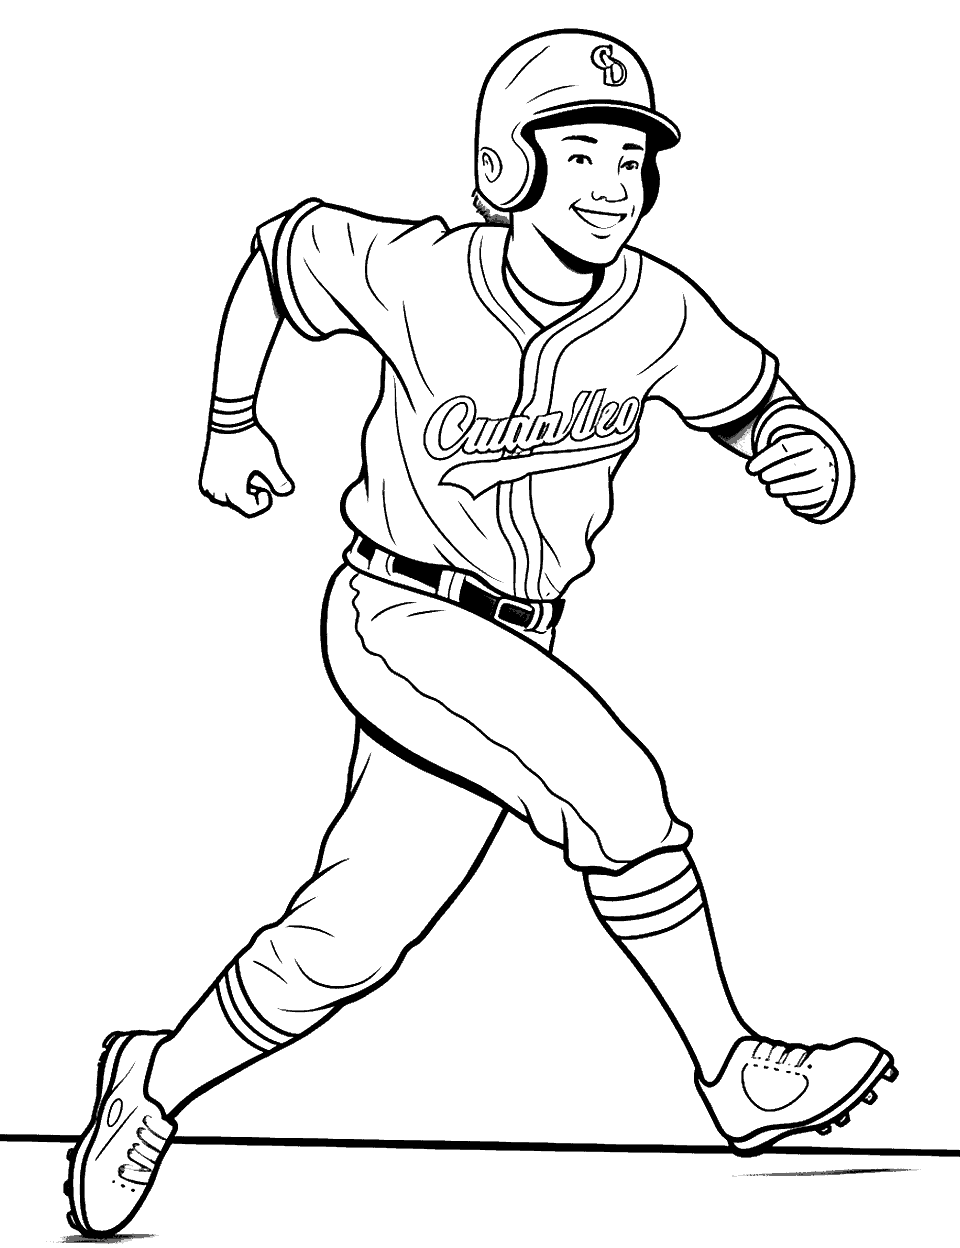 Victory Lap Baseball Coloring Page - A player running bases with a triumphant look after hitting a home run in the championship.